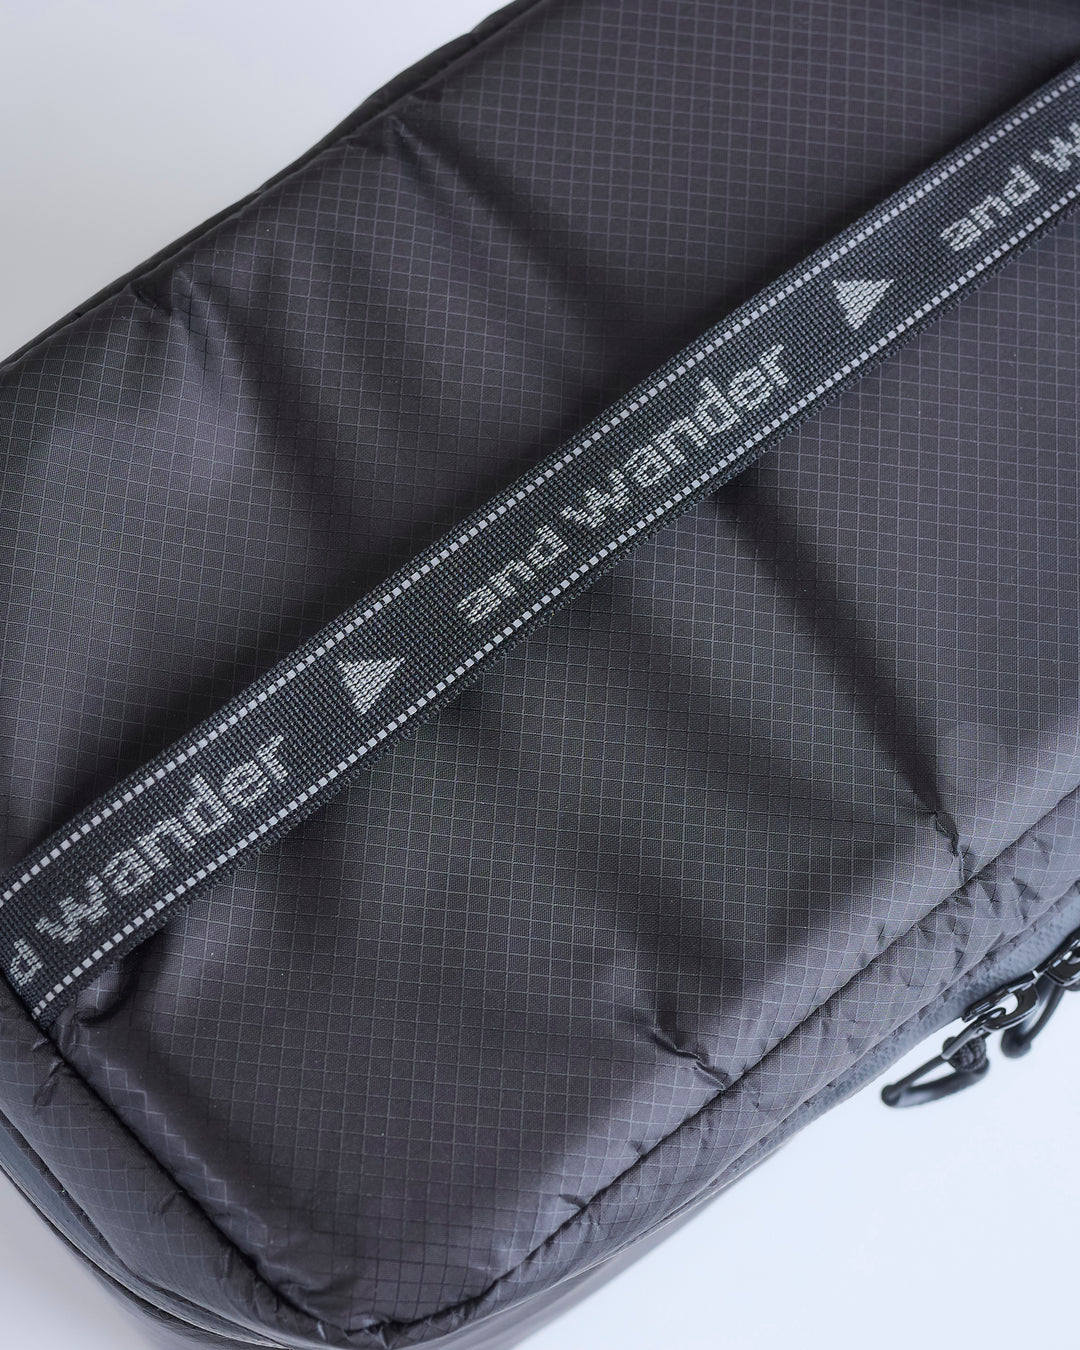 and wander Sil Soft Cordura Cooler Small Charcoal